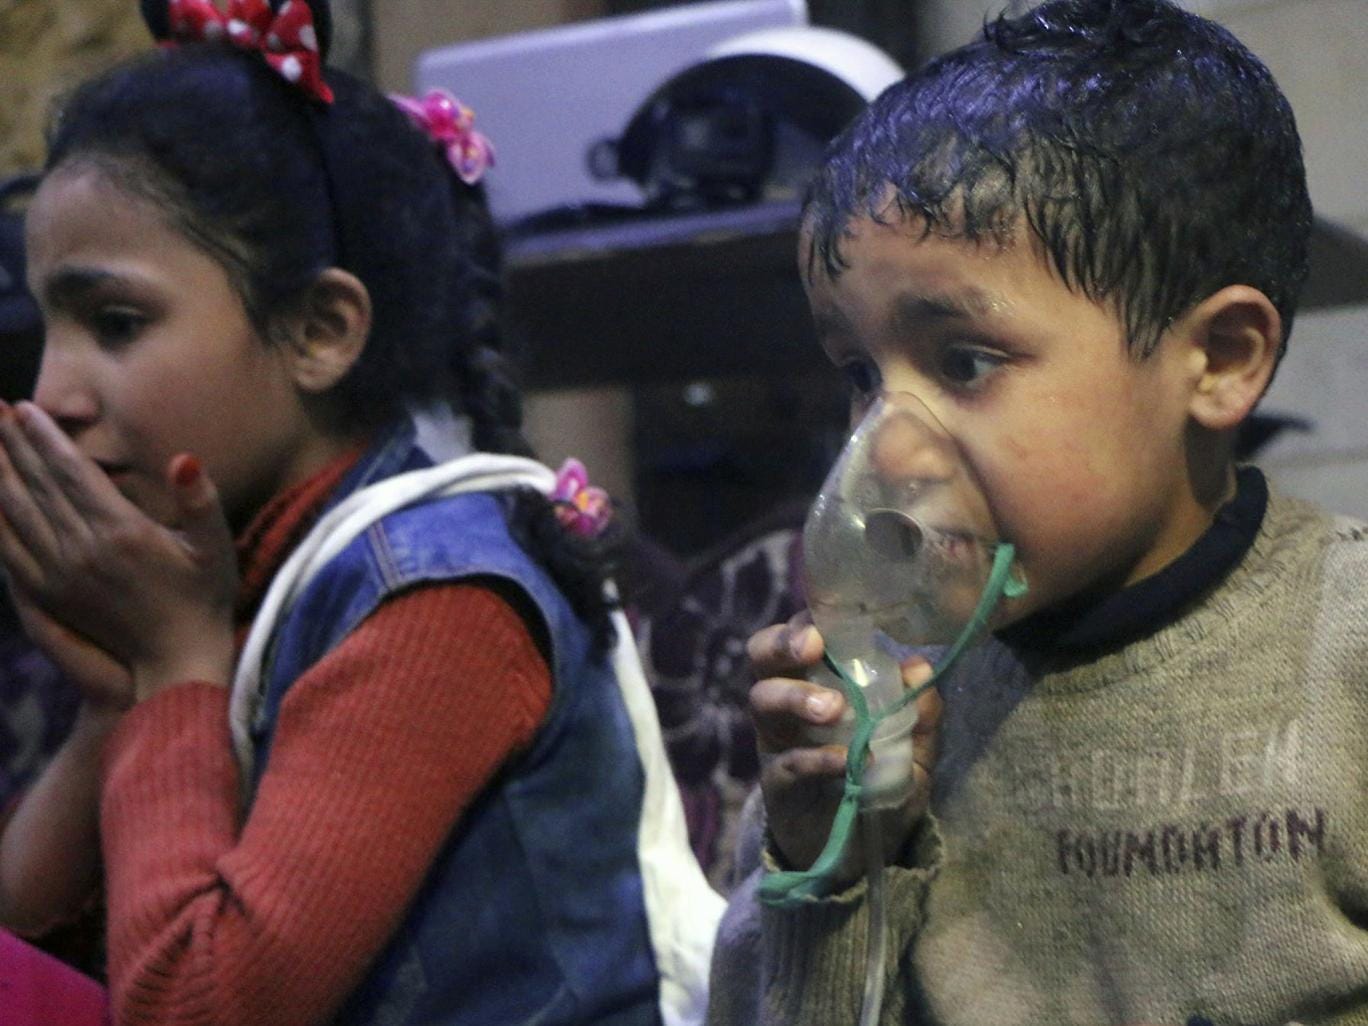 Exclusive: Robert Fisk visits the Syria clinic at the centre of a global crisis